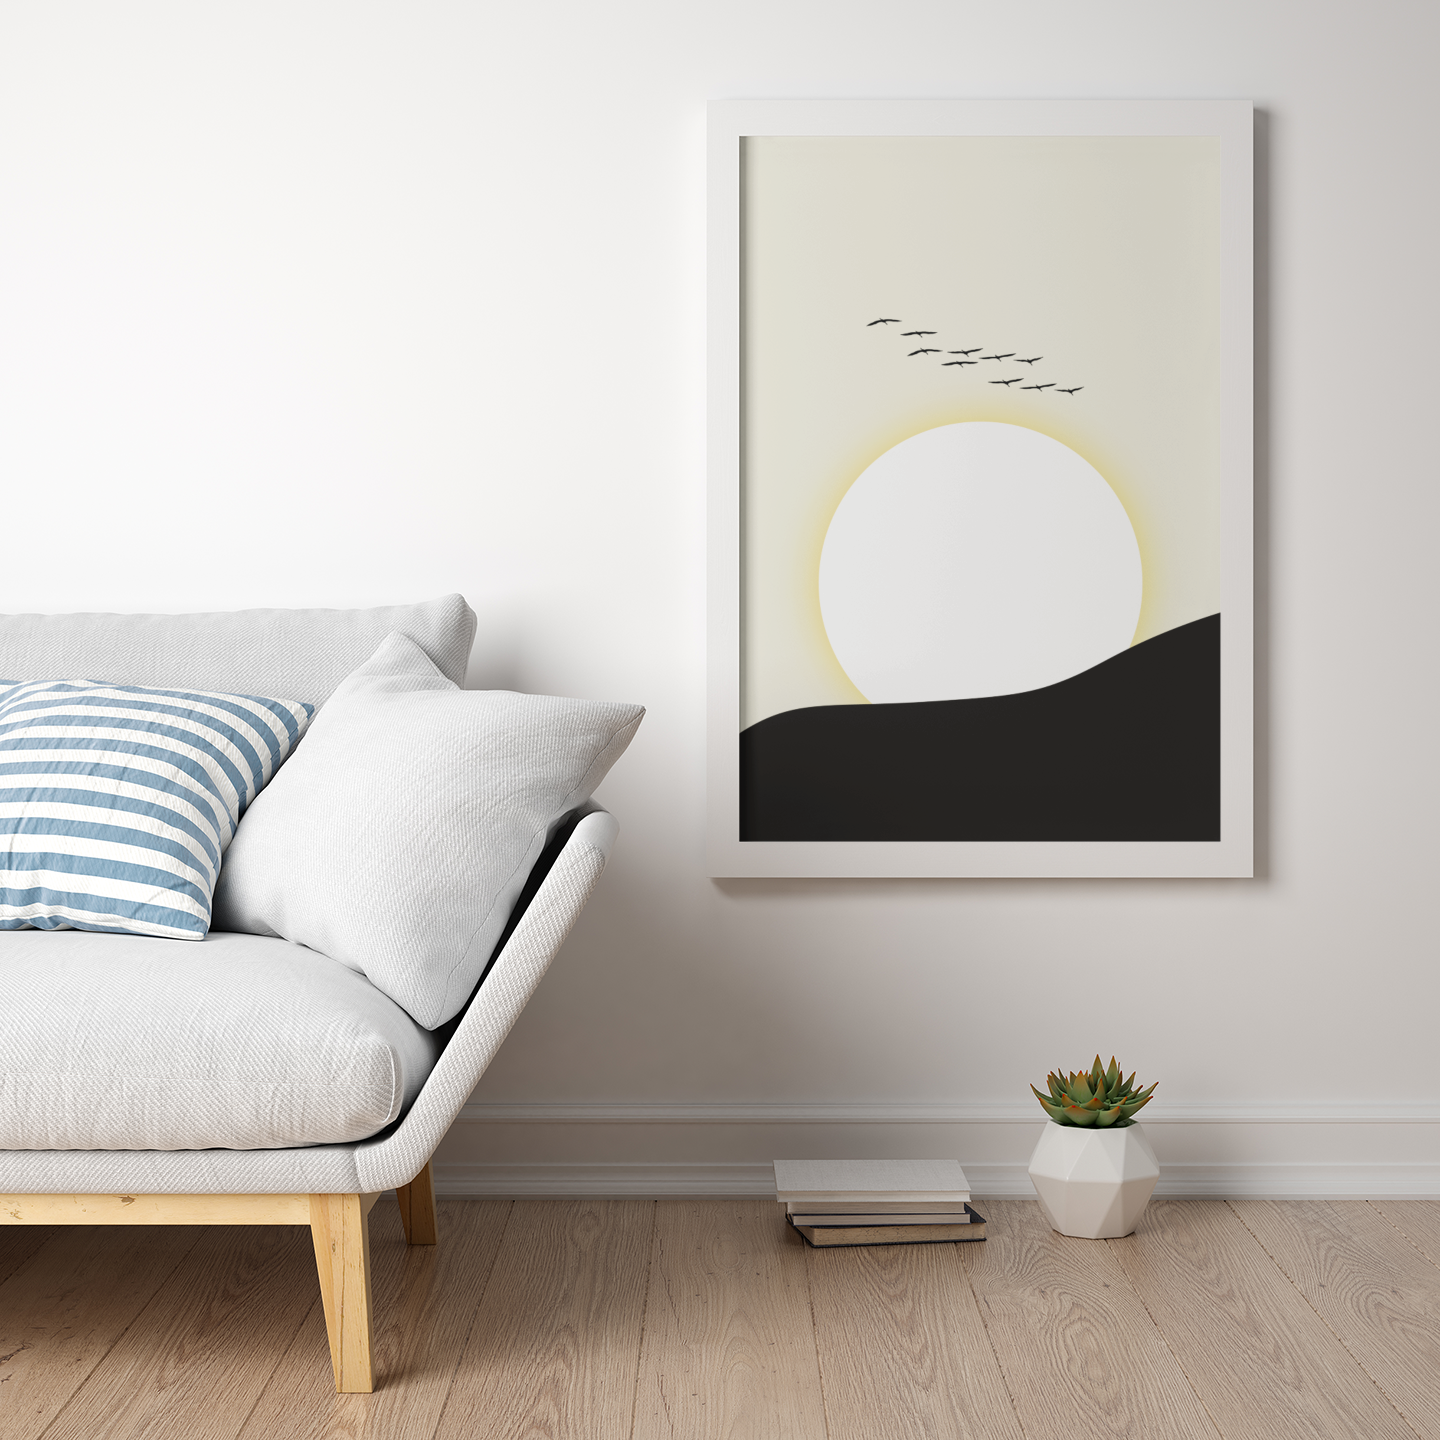 Japanese White Sun and Flying Cranes Wall Art Print